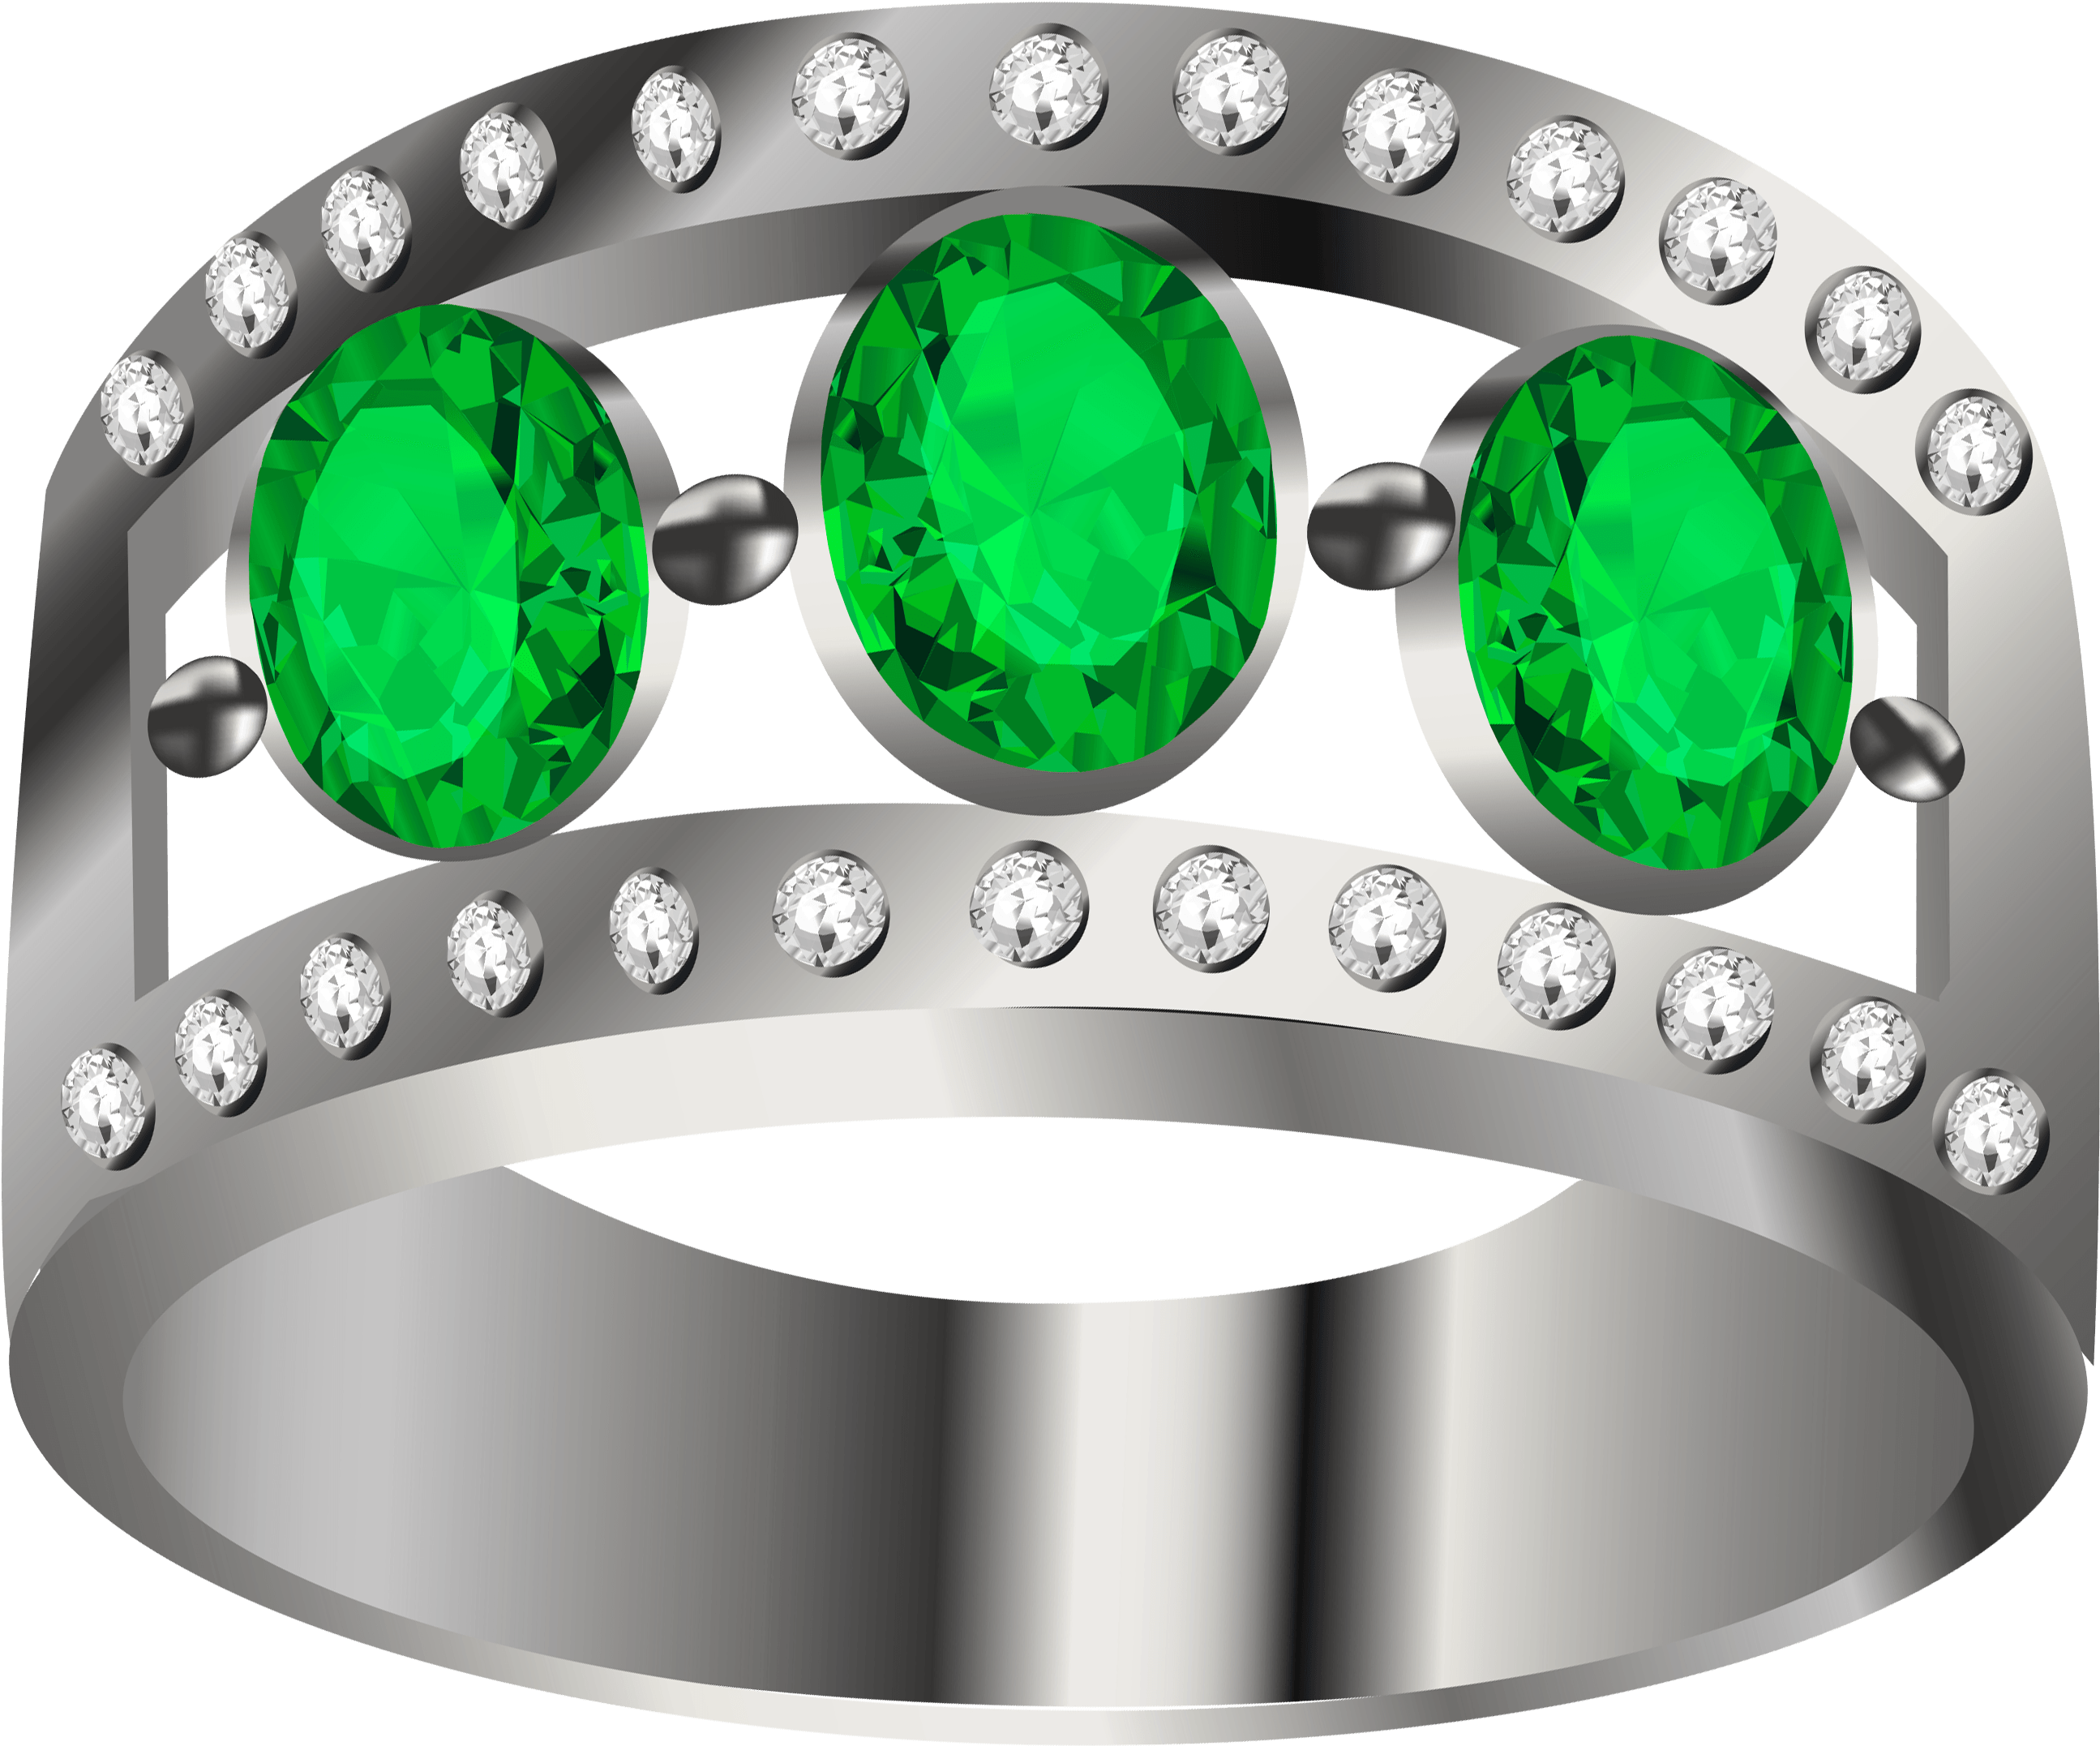 A Silver Ring With Green Gems